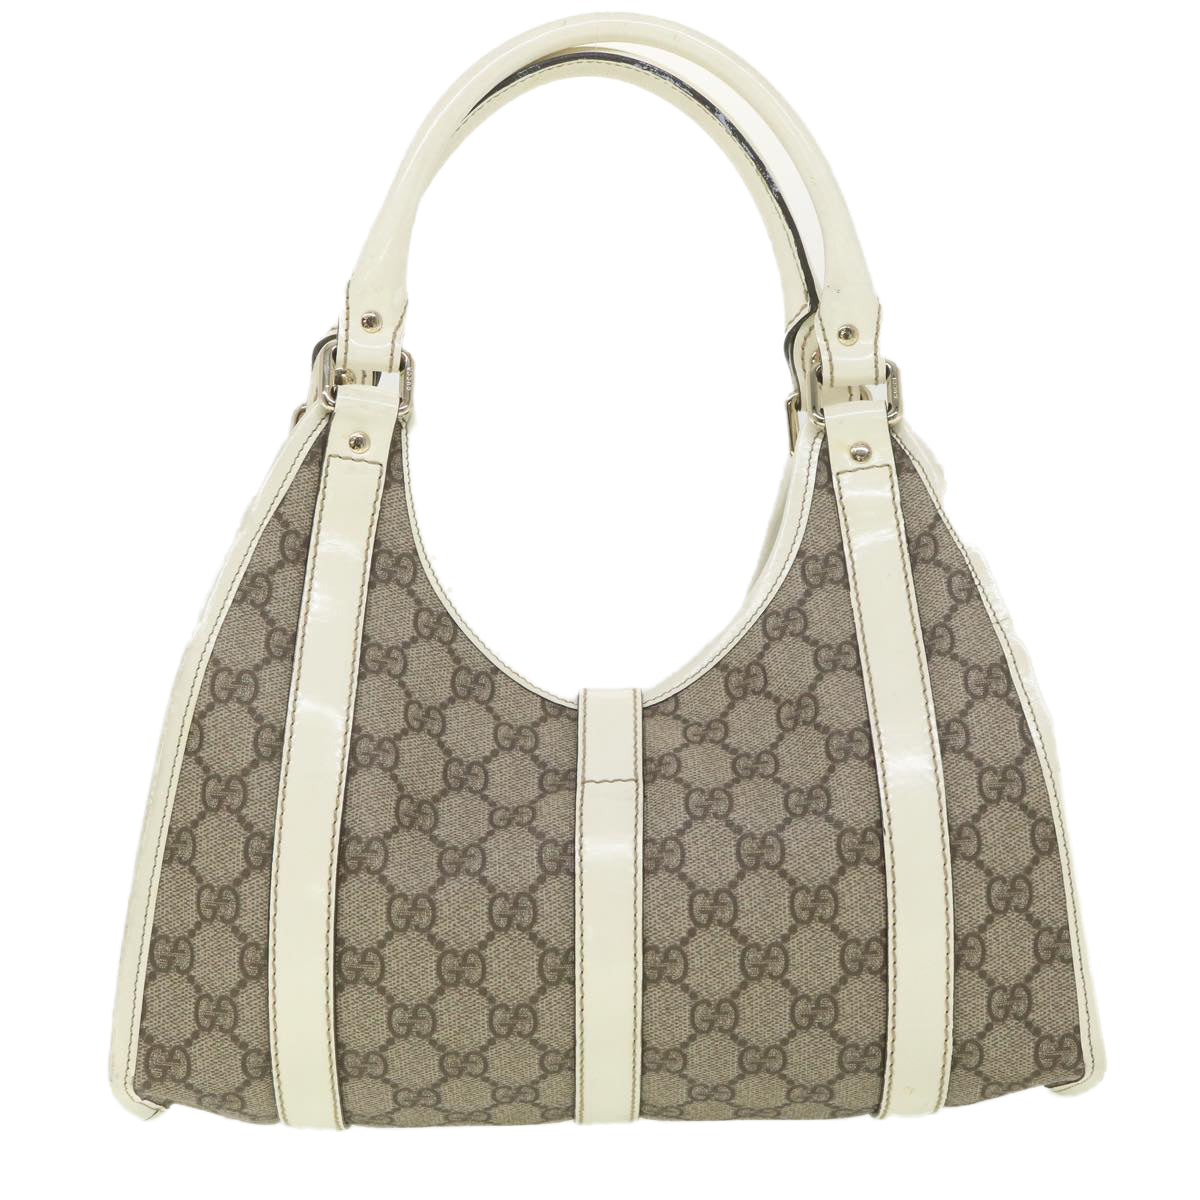 GUCCI GG Supreme Hand Bag PVC Leather Beige 203495 Auth 38280